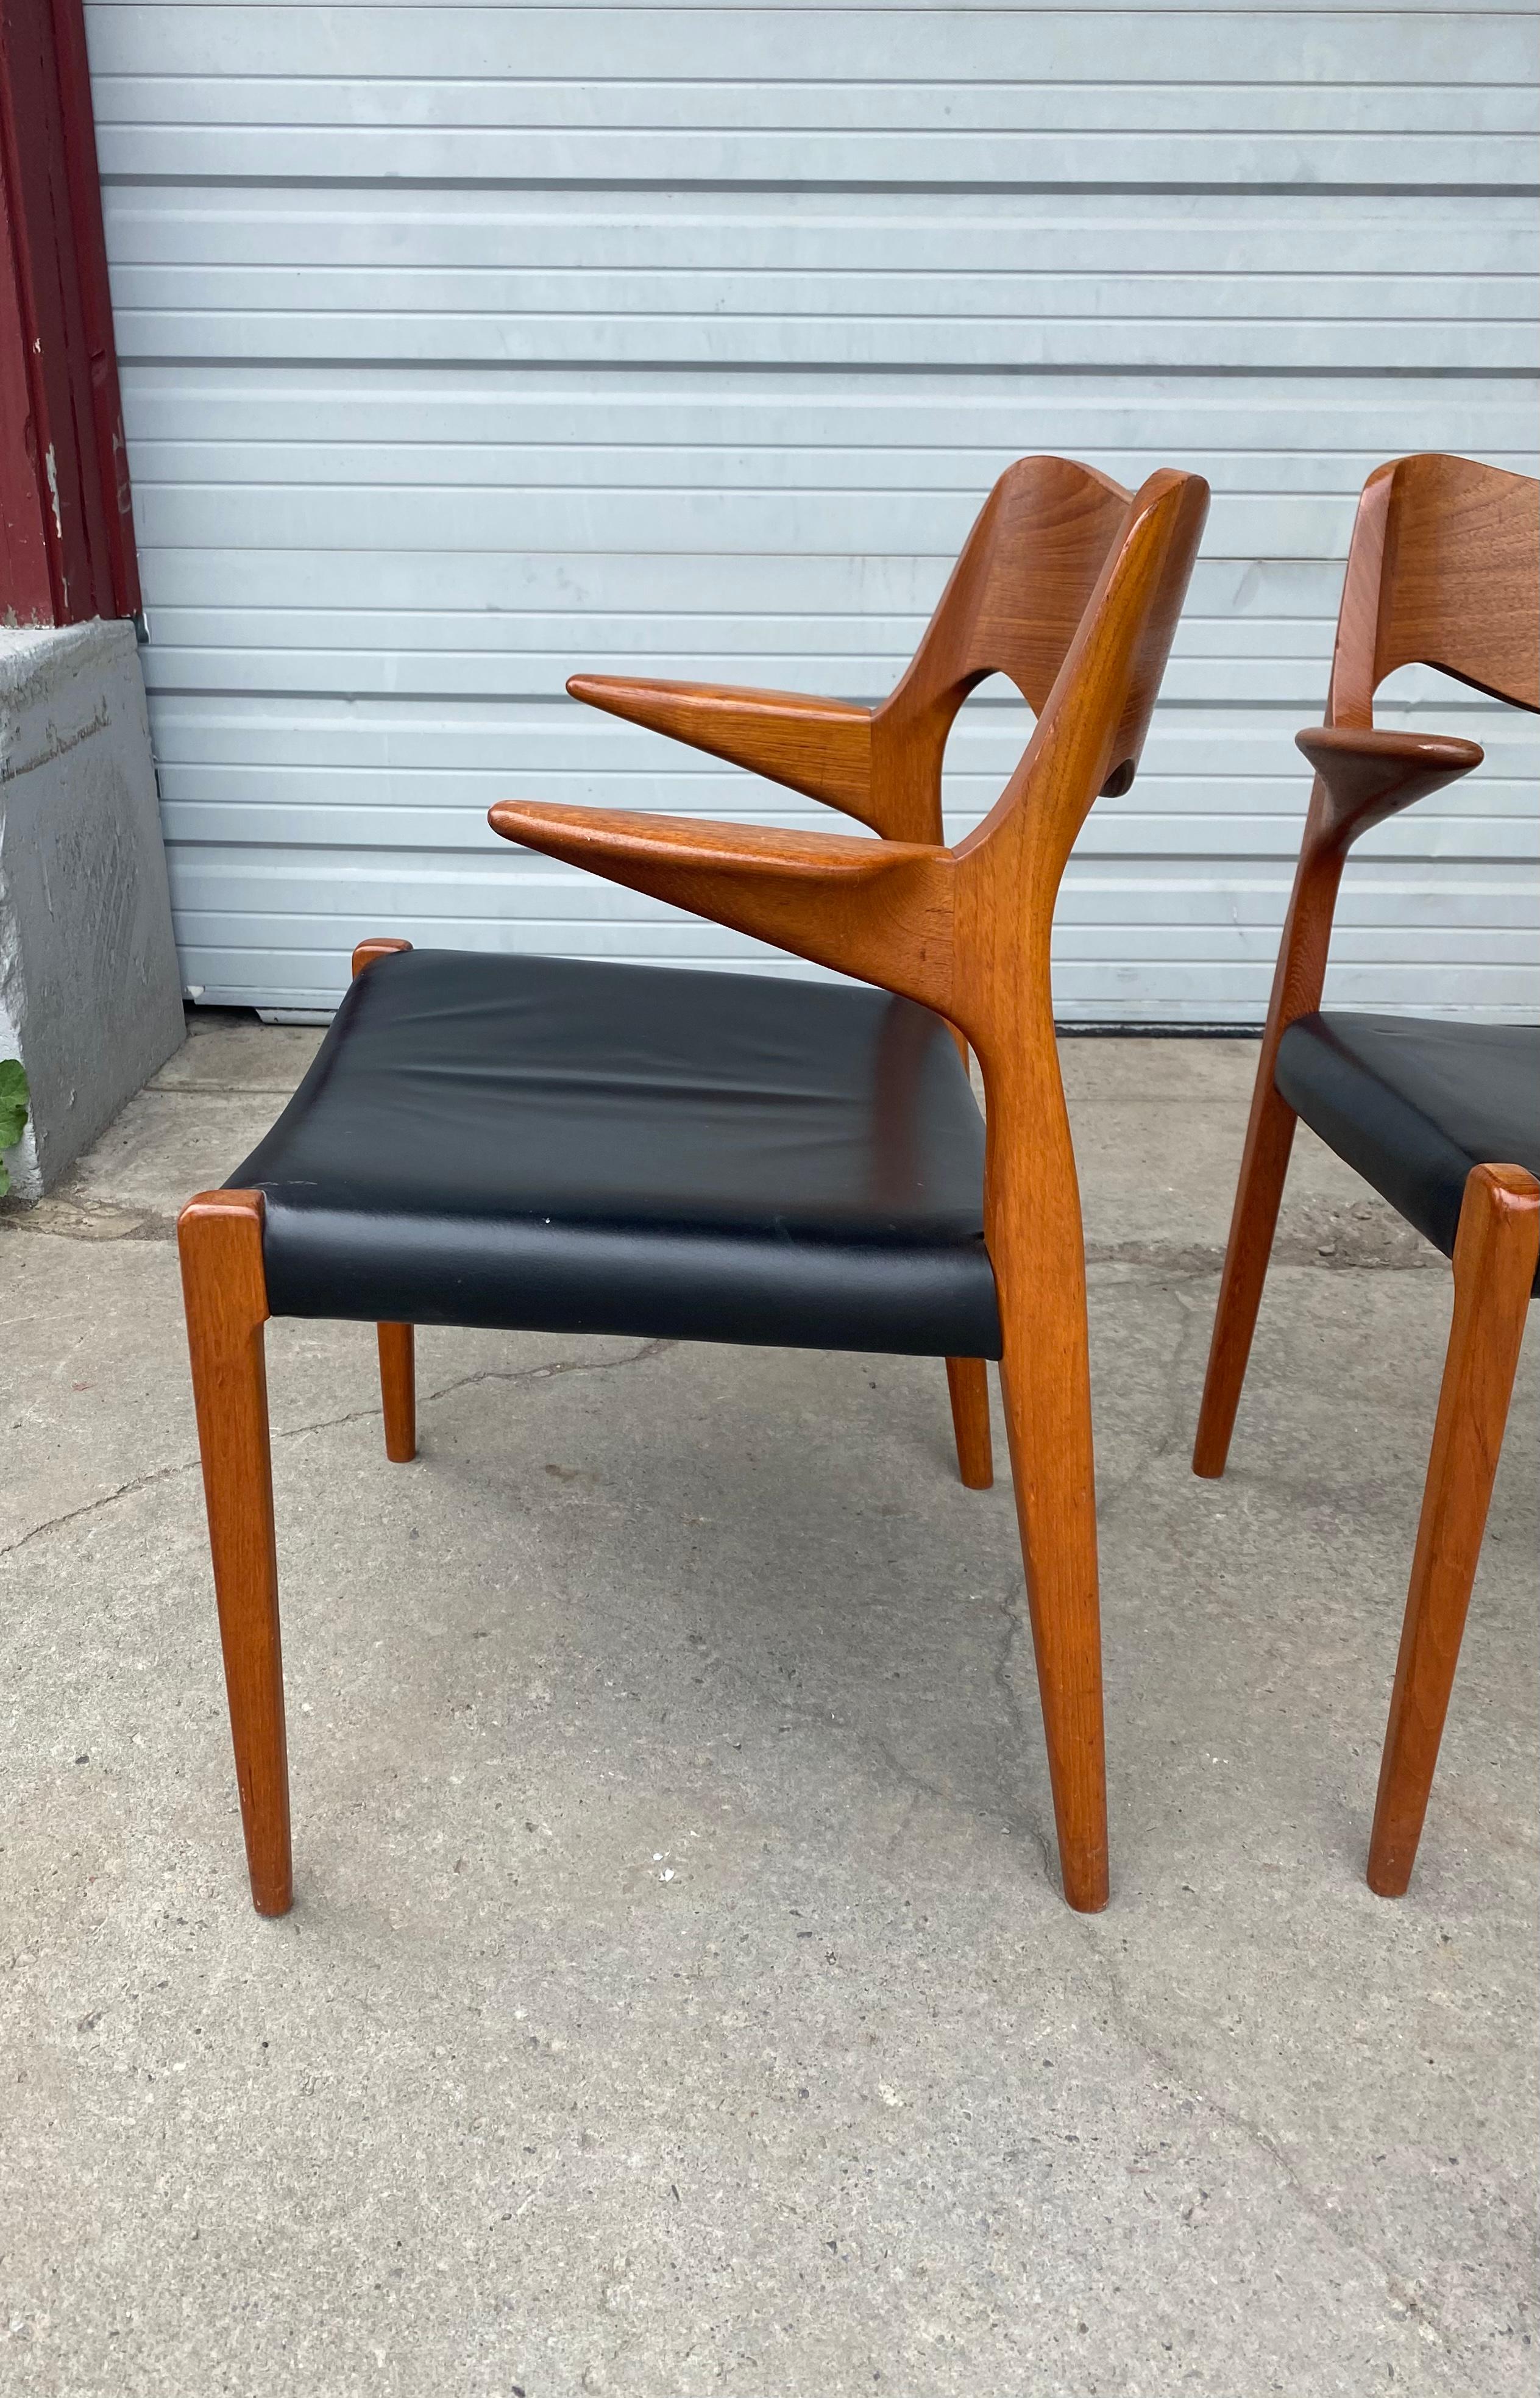 Niels Møller teak / leather Model 55 armchair. Denmark, nice original condition, retains original ink stamp, price per chair, open to offers for set of 4.